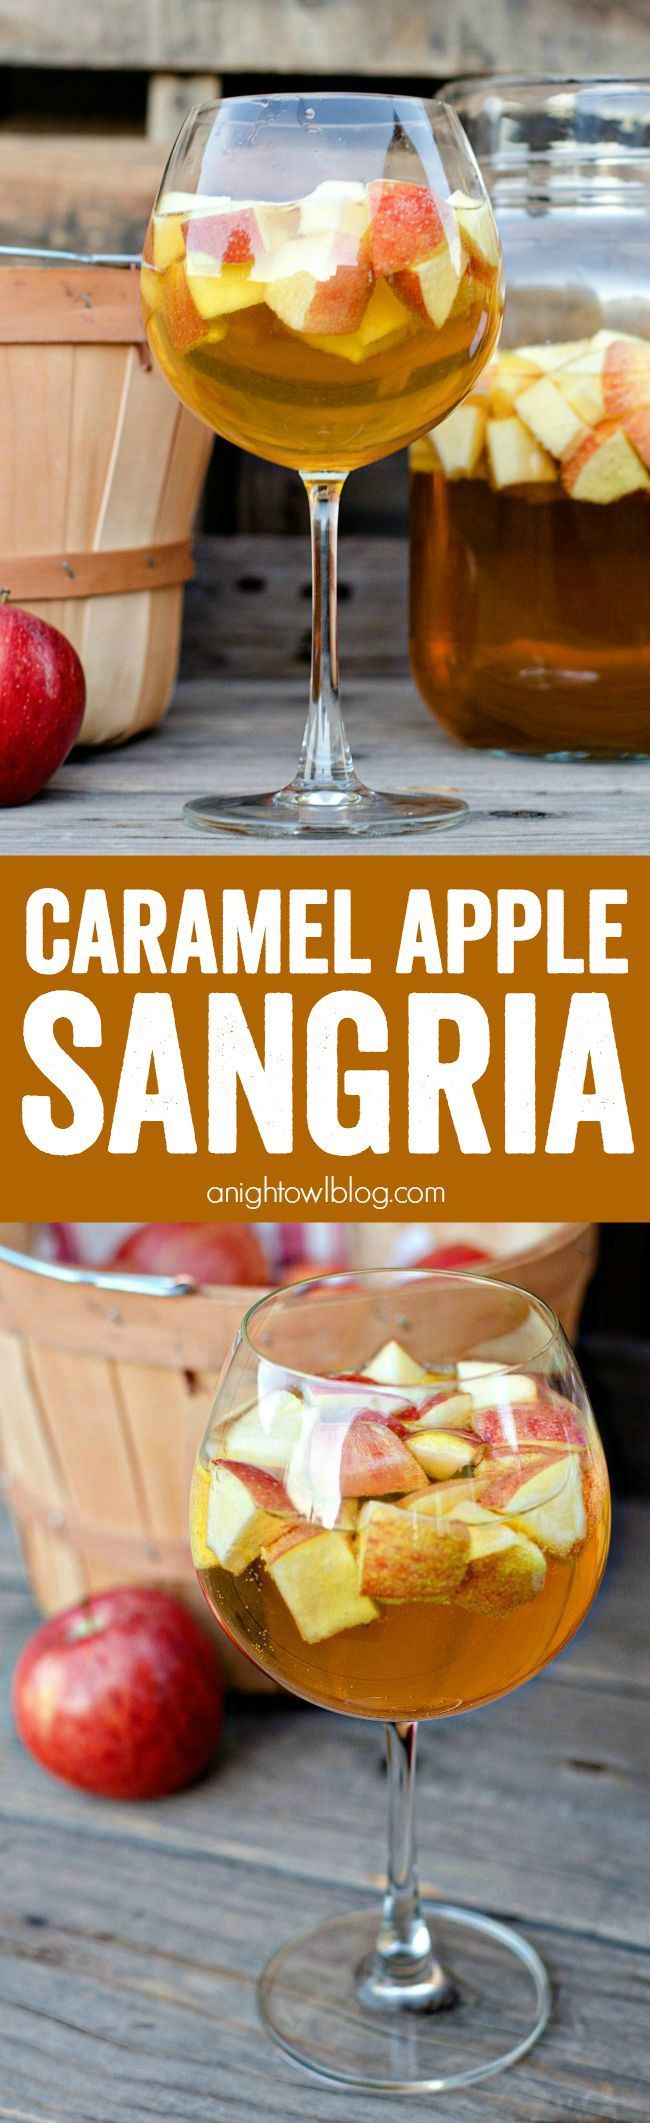 Caramel Apple Sangria – a delicious combination of your favorite flavors for fall in one delicious drink!